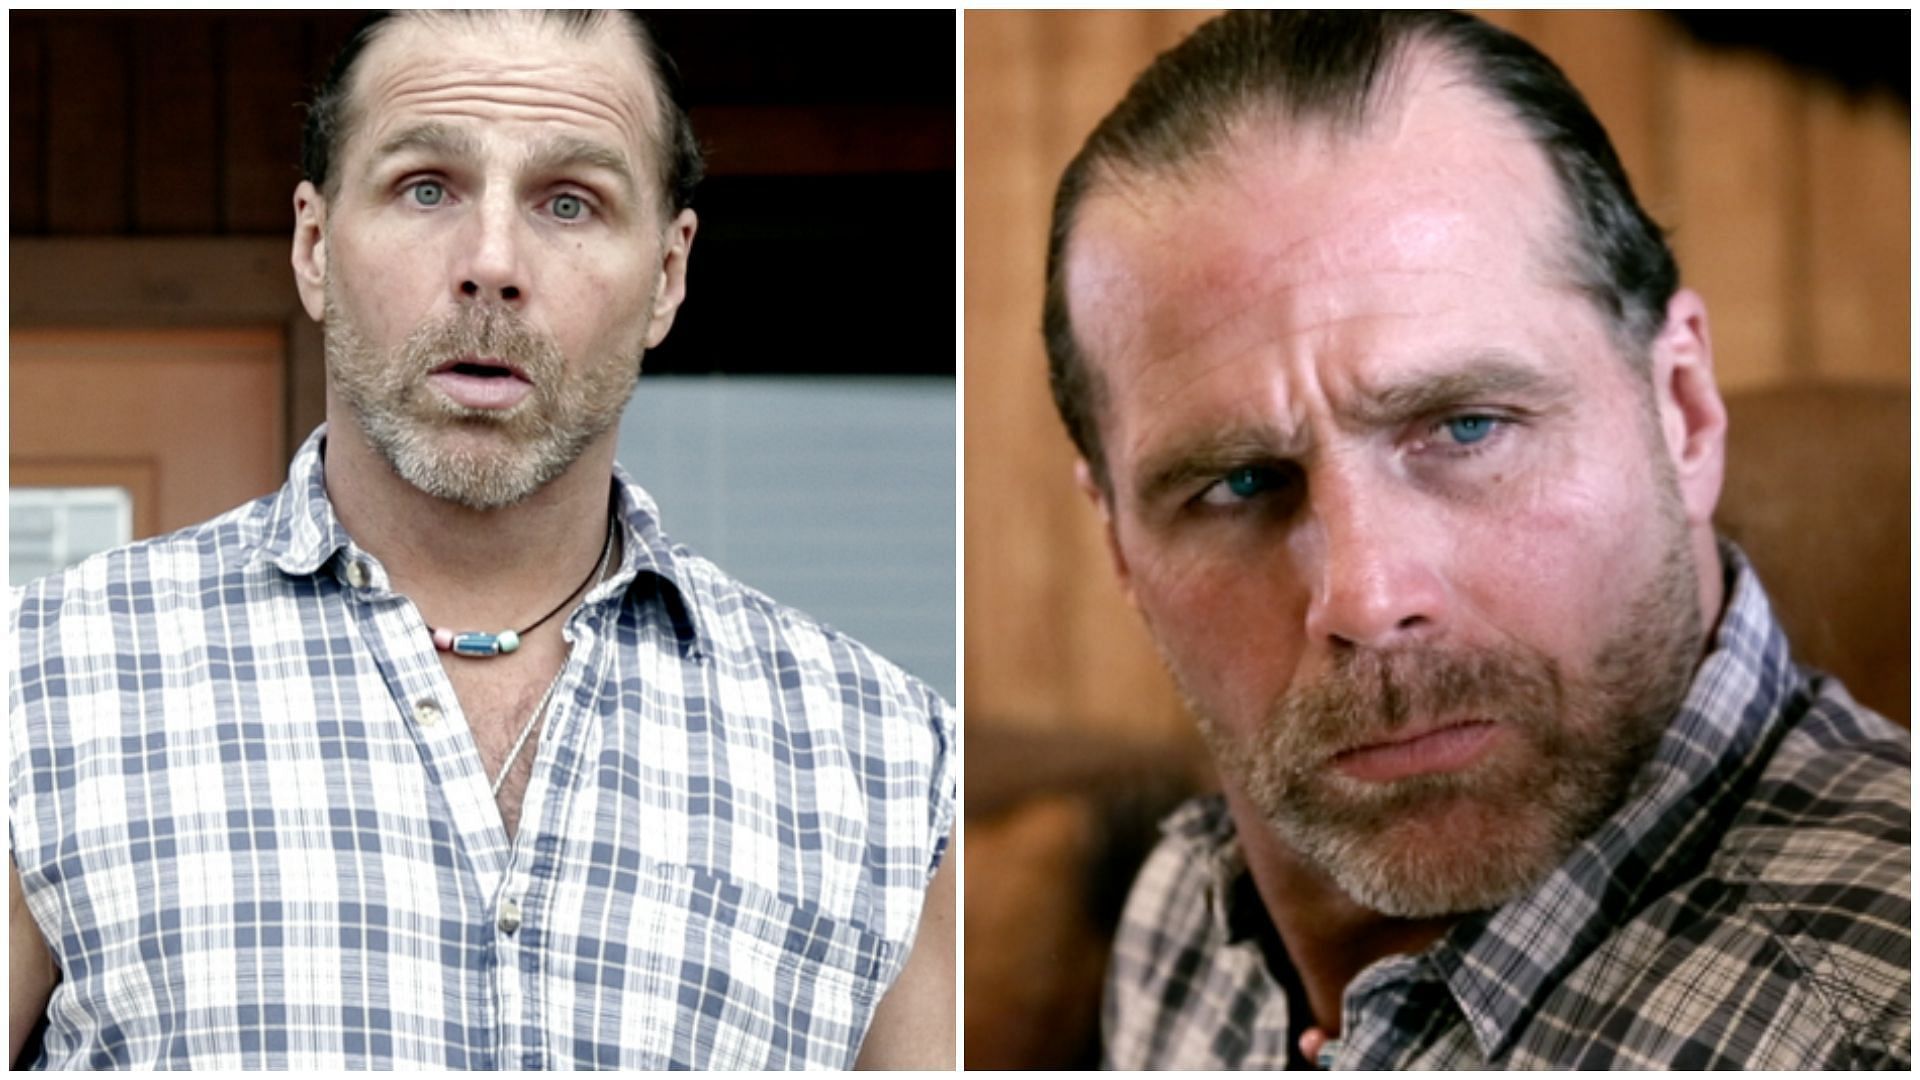 Shawn Michaels is a former WWE World Champion.